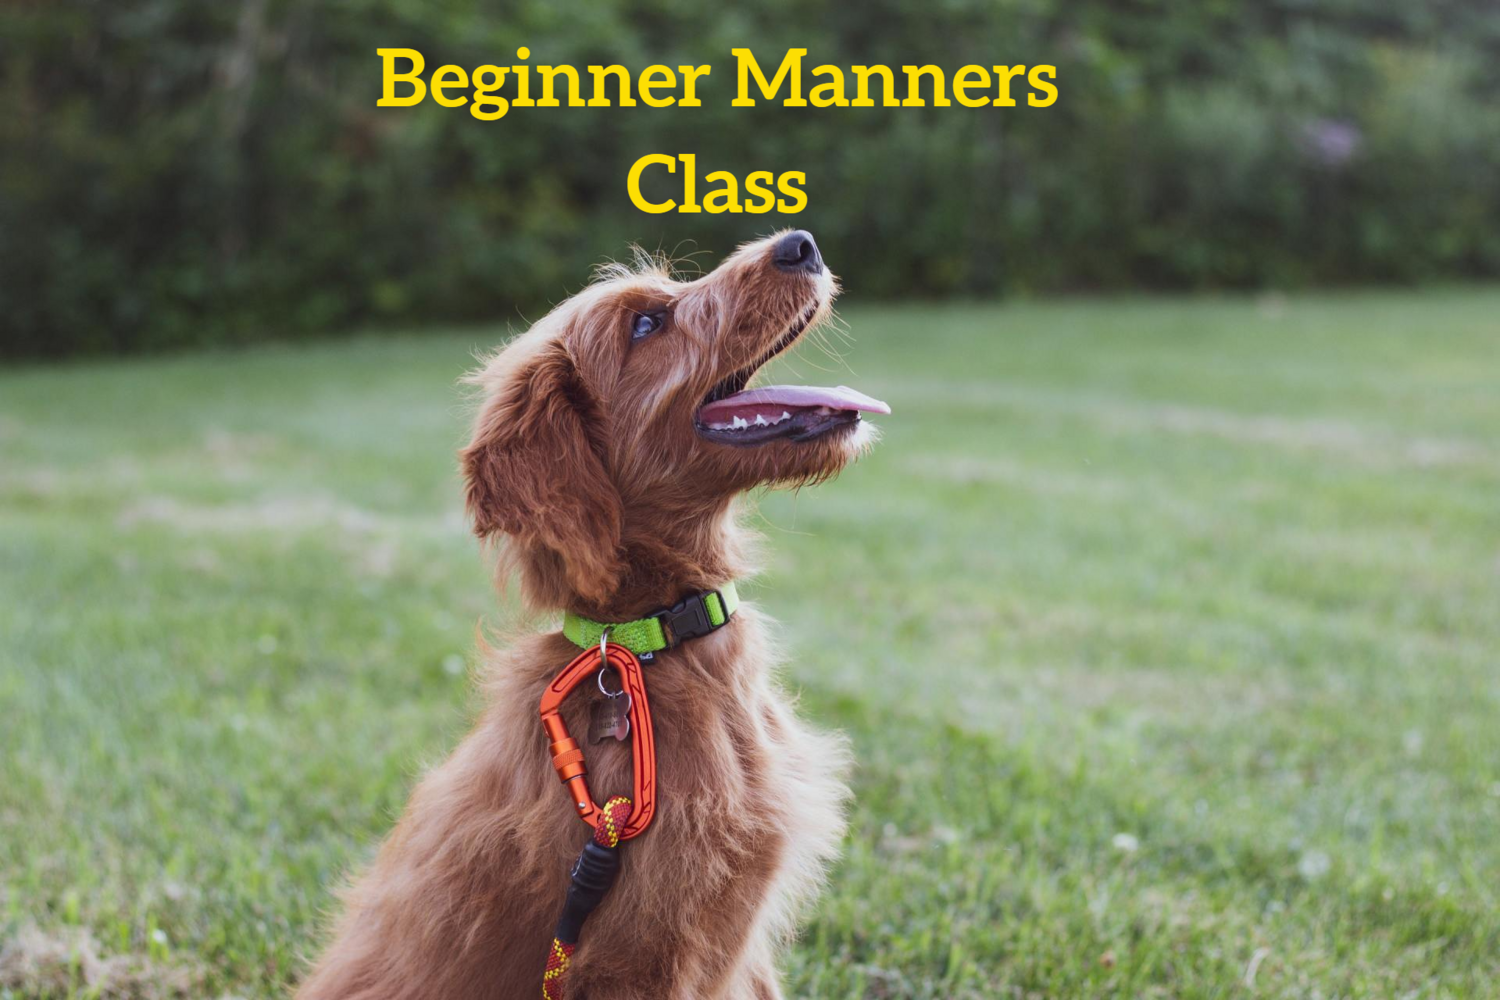 Beginner Manners. Tuesdays at 6:30pm (Starts June 4)
Trainer: Nil O'Boyle